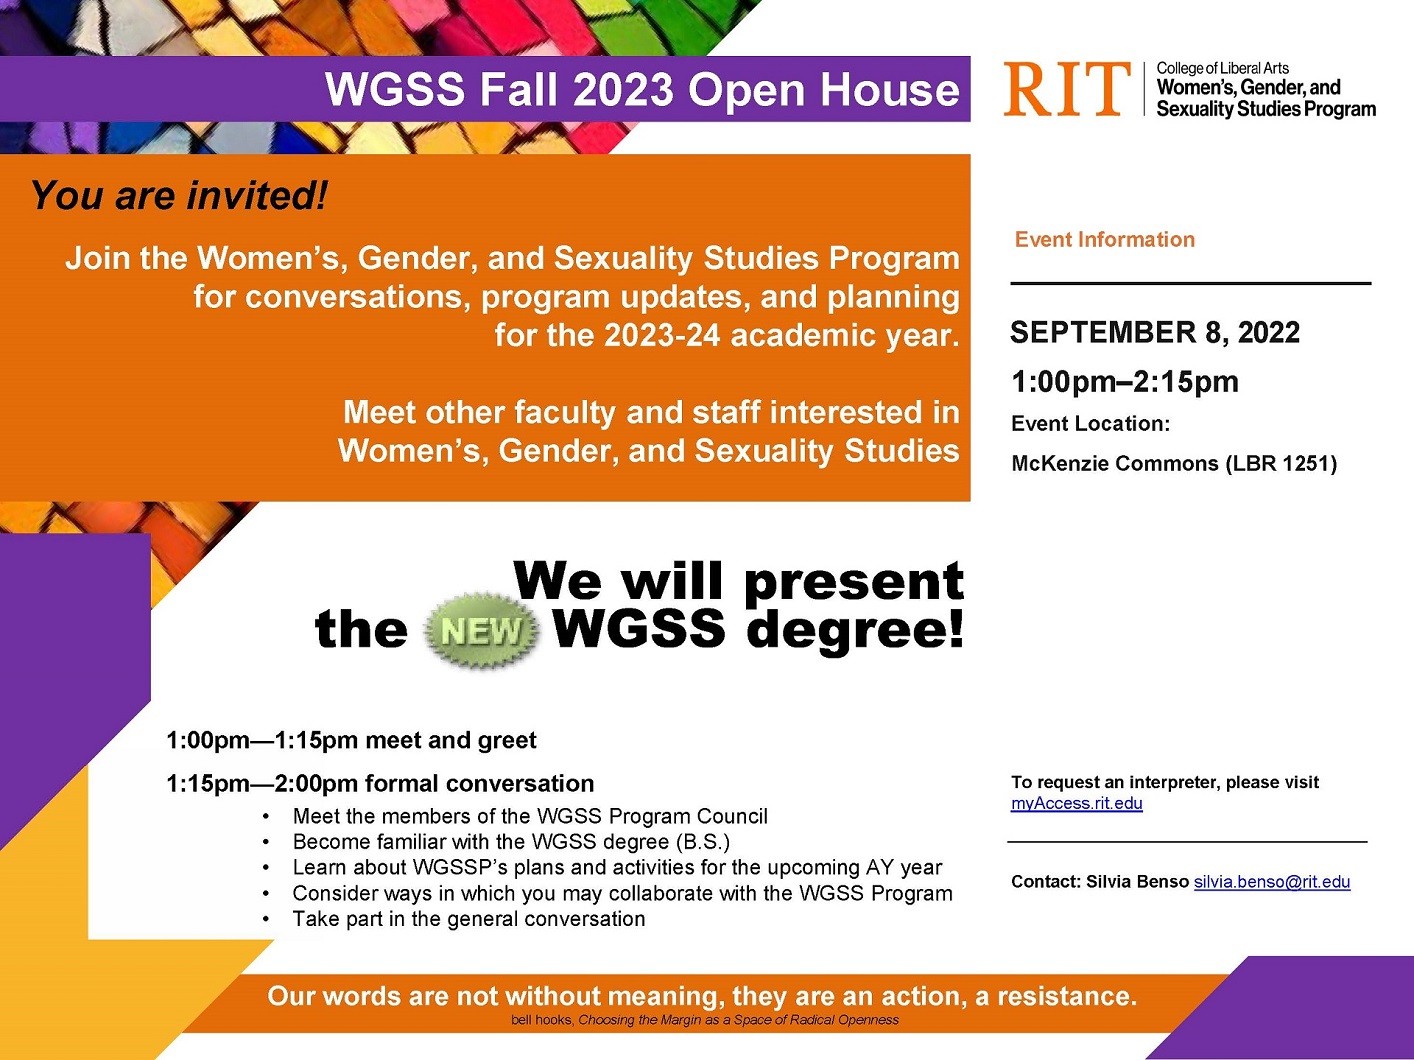 WGSS open house and WGSS degree